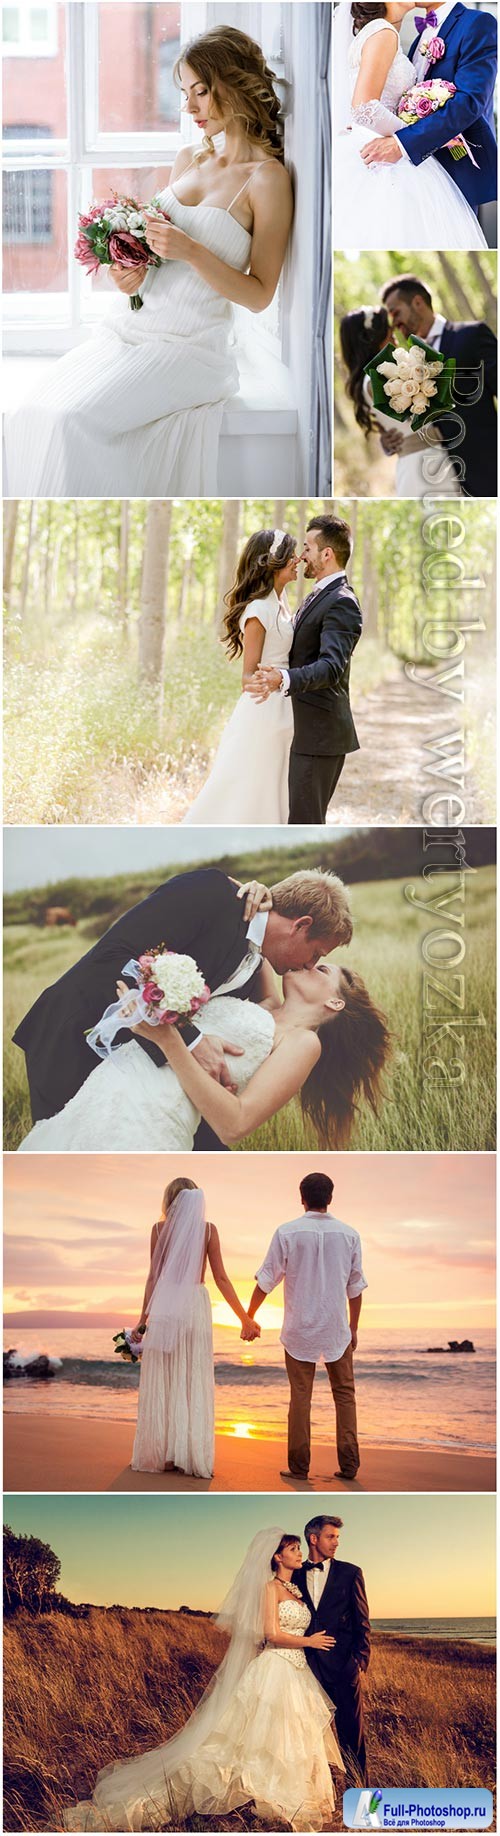 Wedding, couples in love, bride and groom stock photo